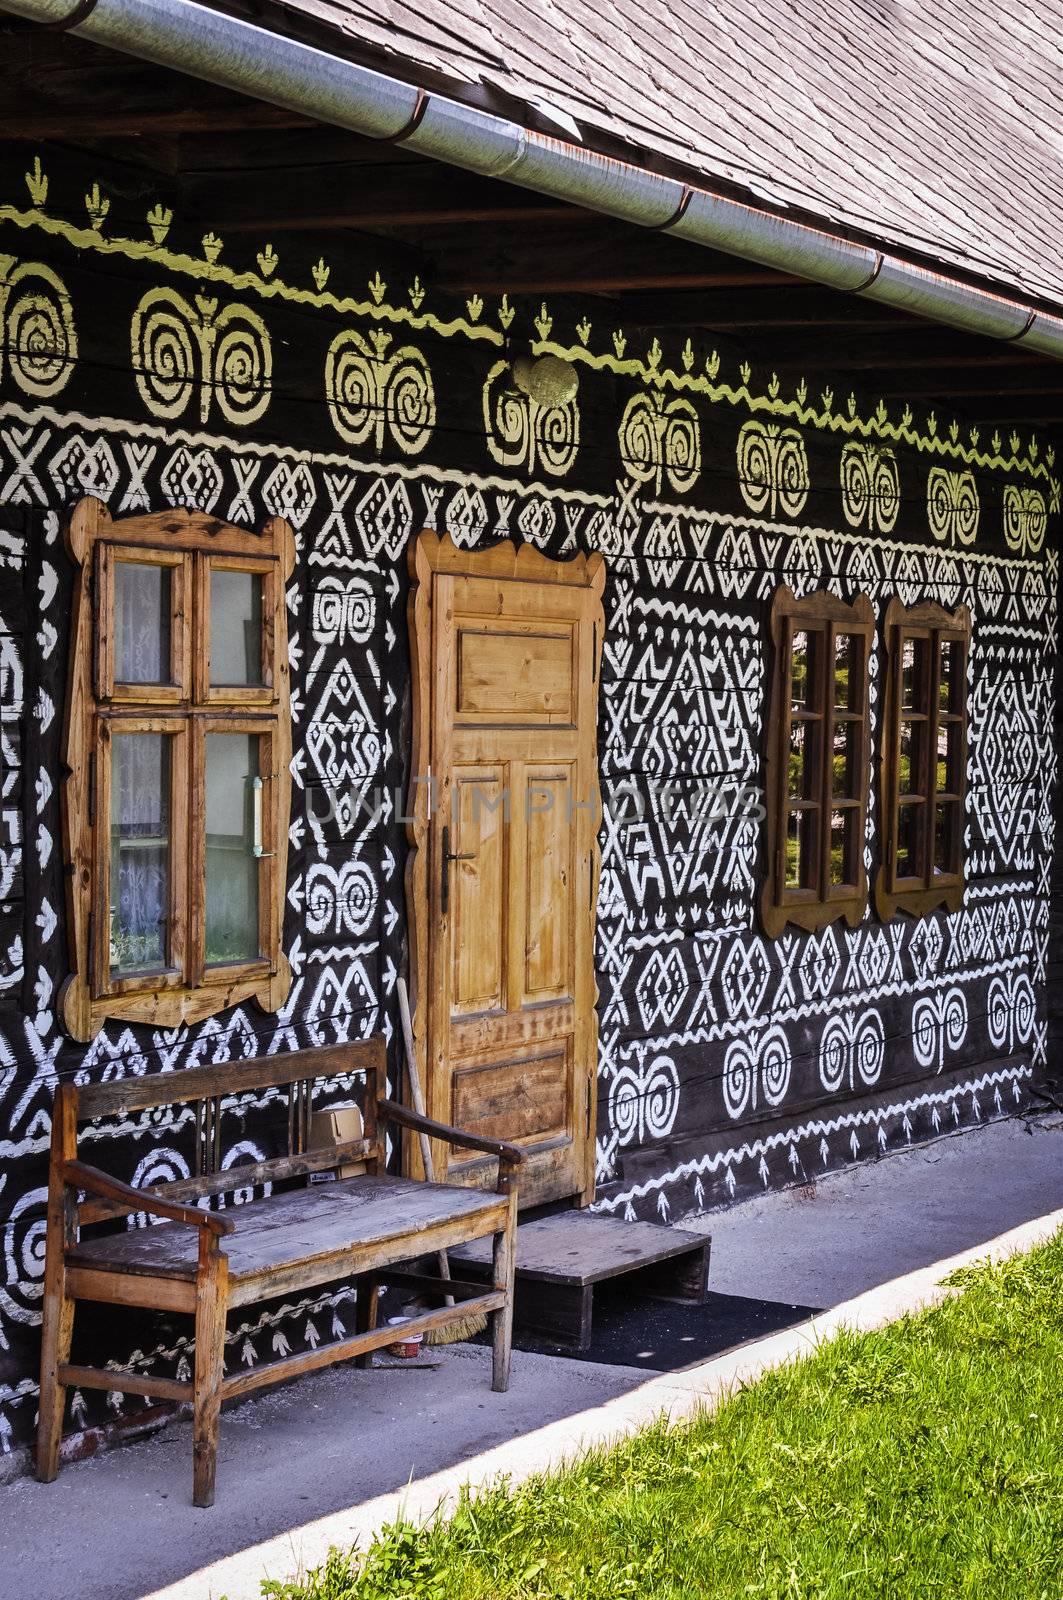 Traditional cottage doors and window detail, Cicmany, Slovakia